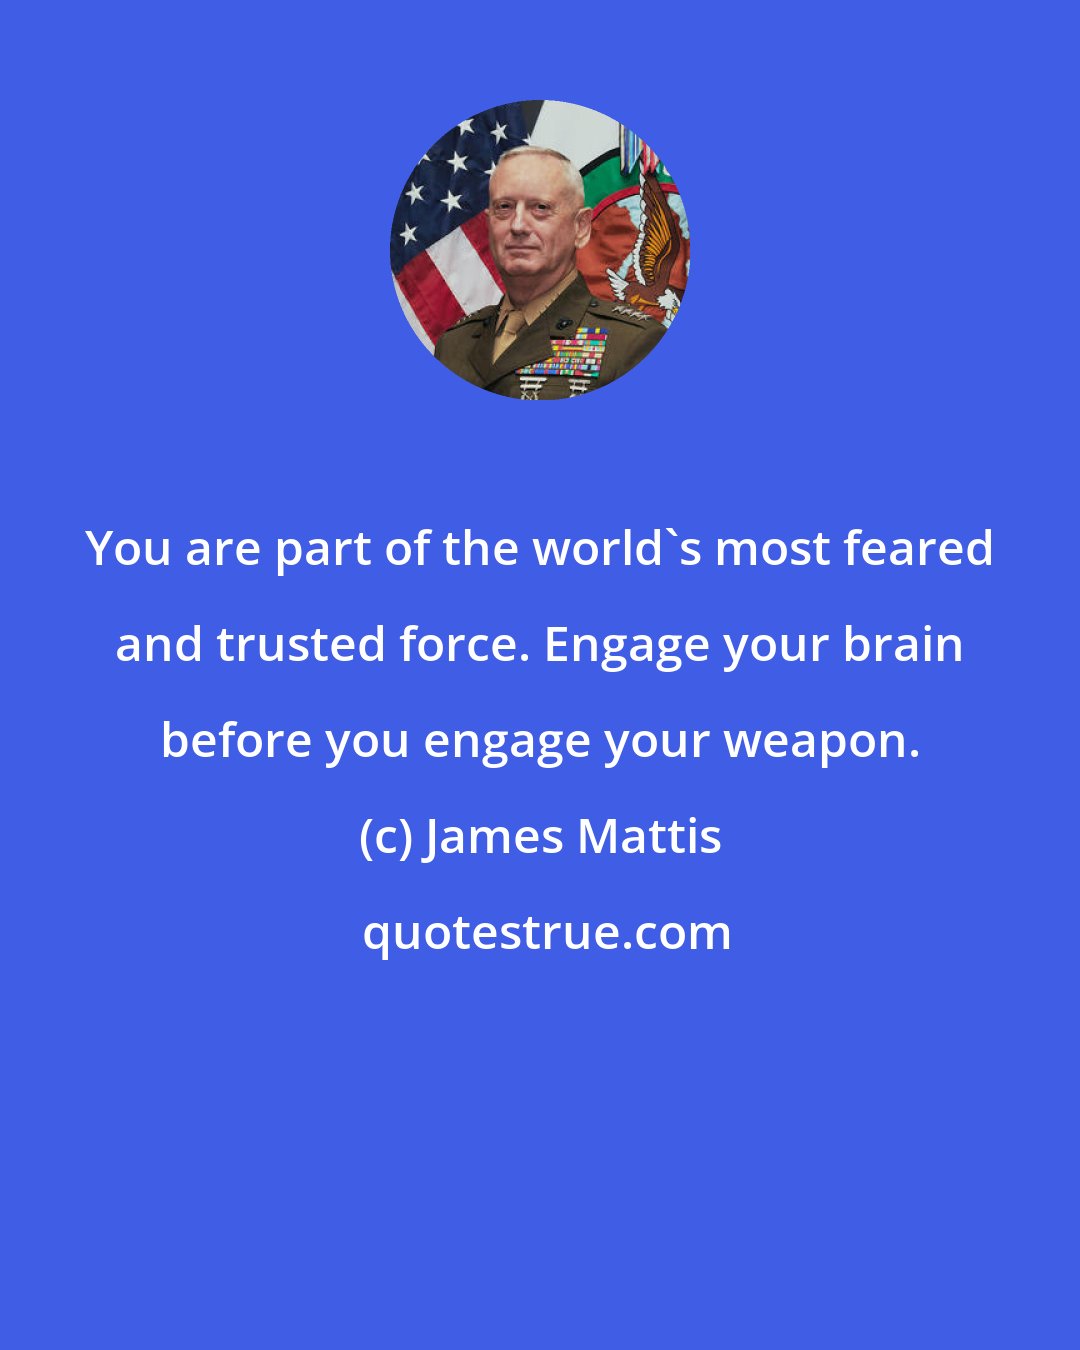 James Mattis: You are part of the world's most feared and trusted force. Engage your brain before you engage your weapon.